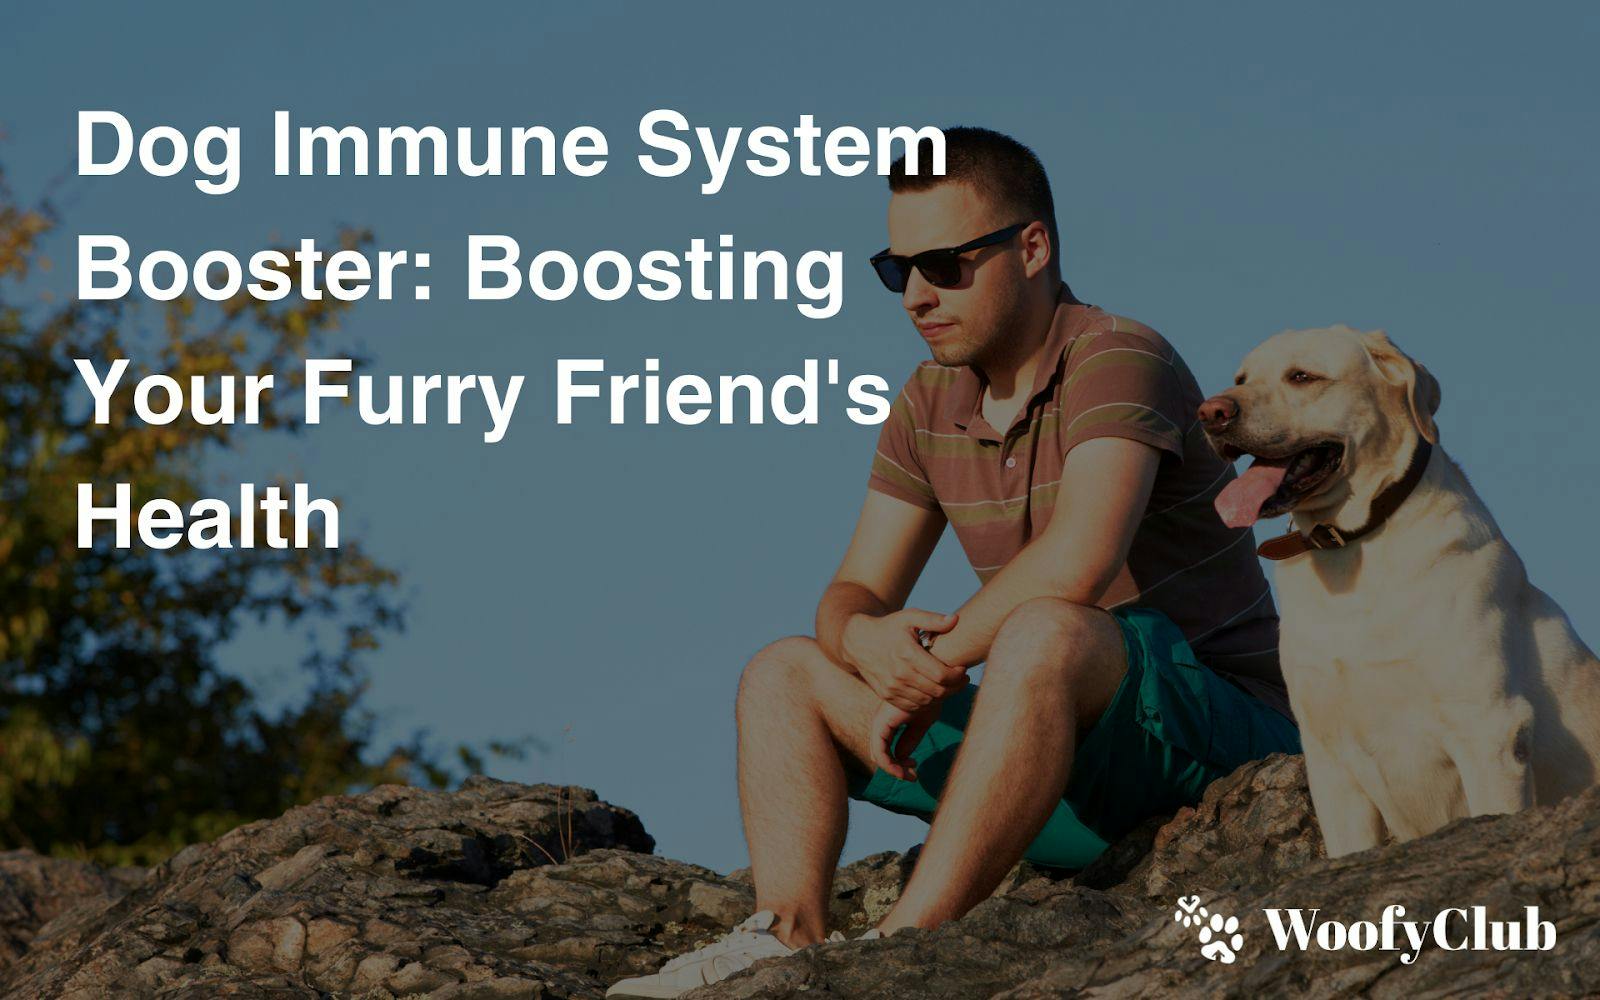 Dog Immune System Booster: Boosting Your Furry Friend's Health